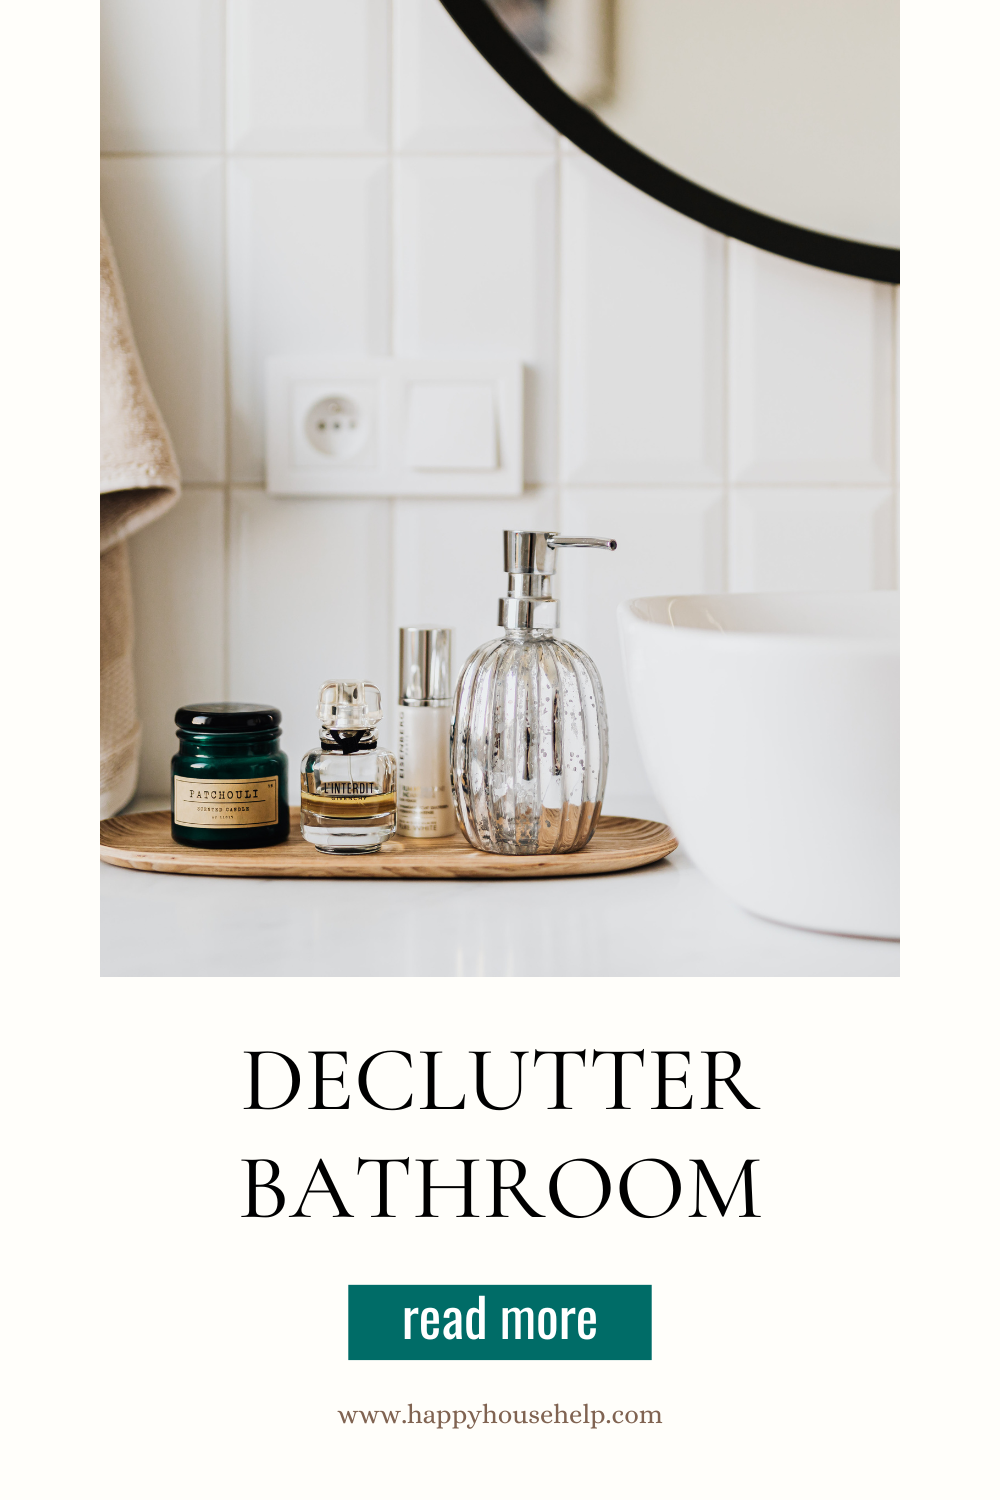 Tackle clutter in the bathroom with this declutter post